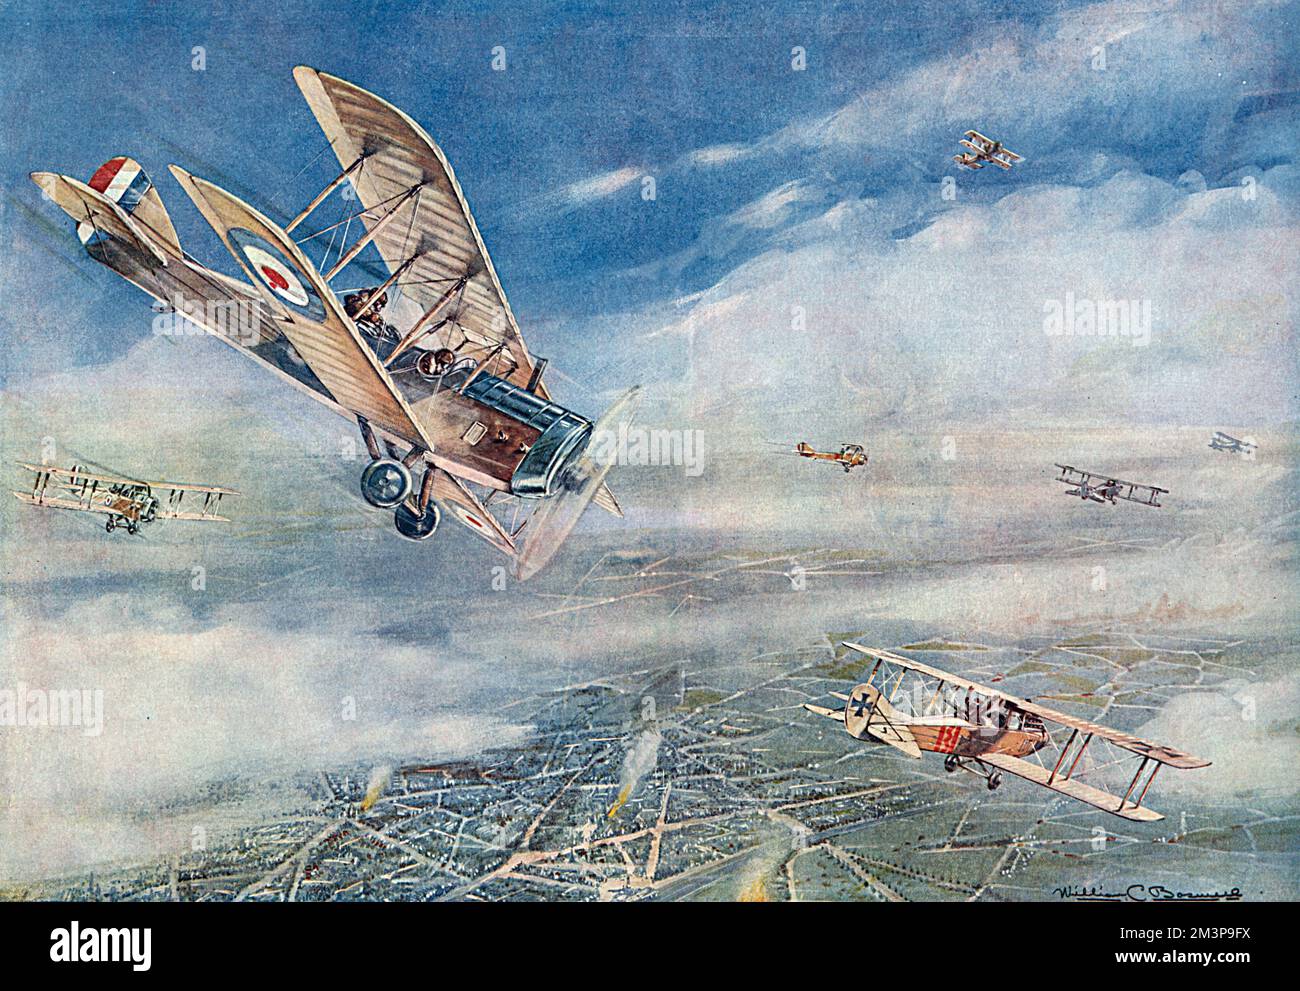 An aerial battle on the Western front with a German squadron seen in retreat with the last one (bottom right) being pursued by a British antagonist on her tail.  Having possibly run out of ammunition the German gunner puts up his arms in surrender after which point the British planes permitted him to make a safe landing near the British lines as a prison-of-war.  The Tatler comments that, 'the incident may account for some of the undamaged Boche planes which are to be seen at some of our aerodromes.'      Date: 1918 Stock Photo